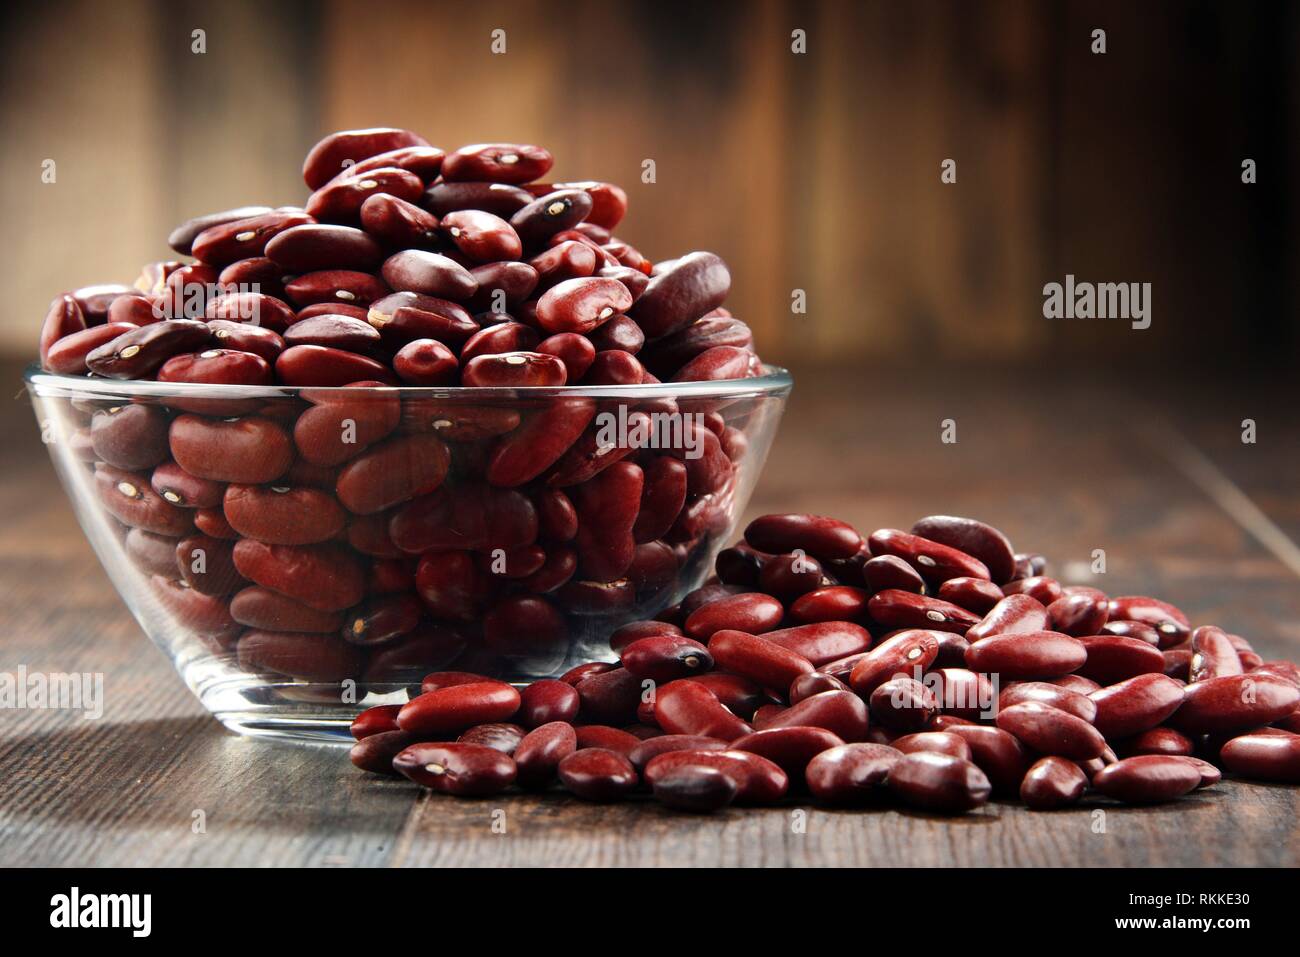 Composition with bowl of kidney bean on wooden table. Stock Photo